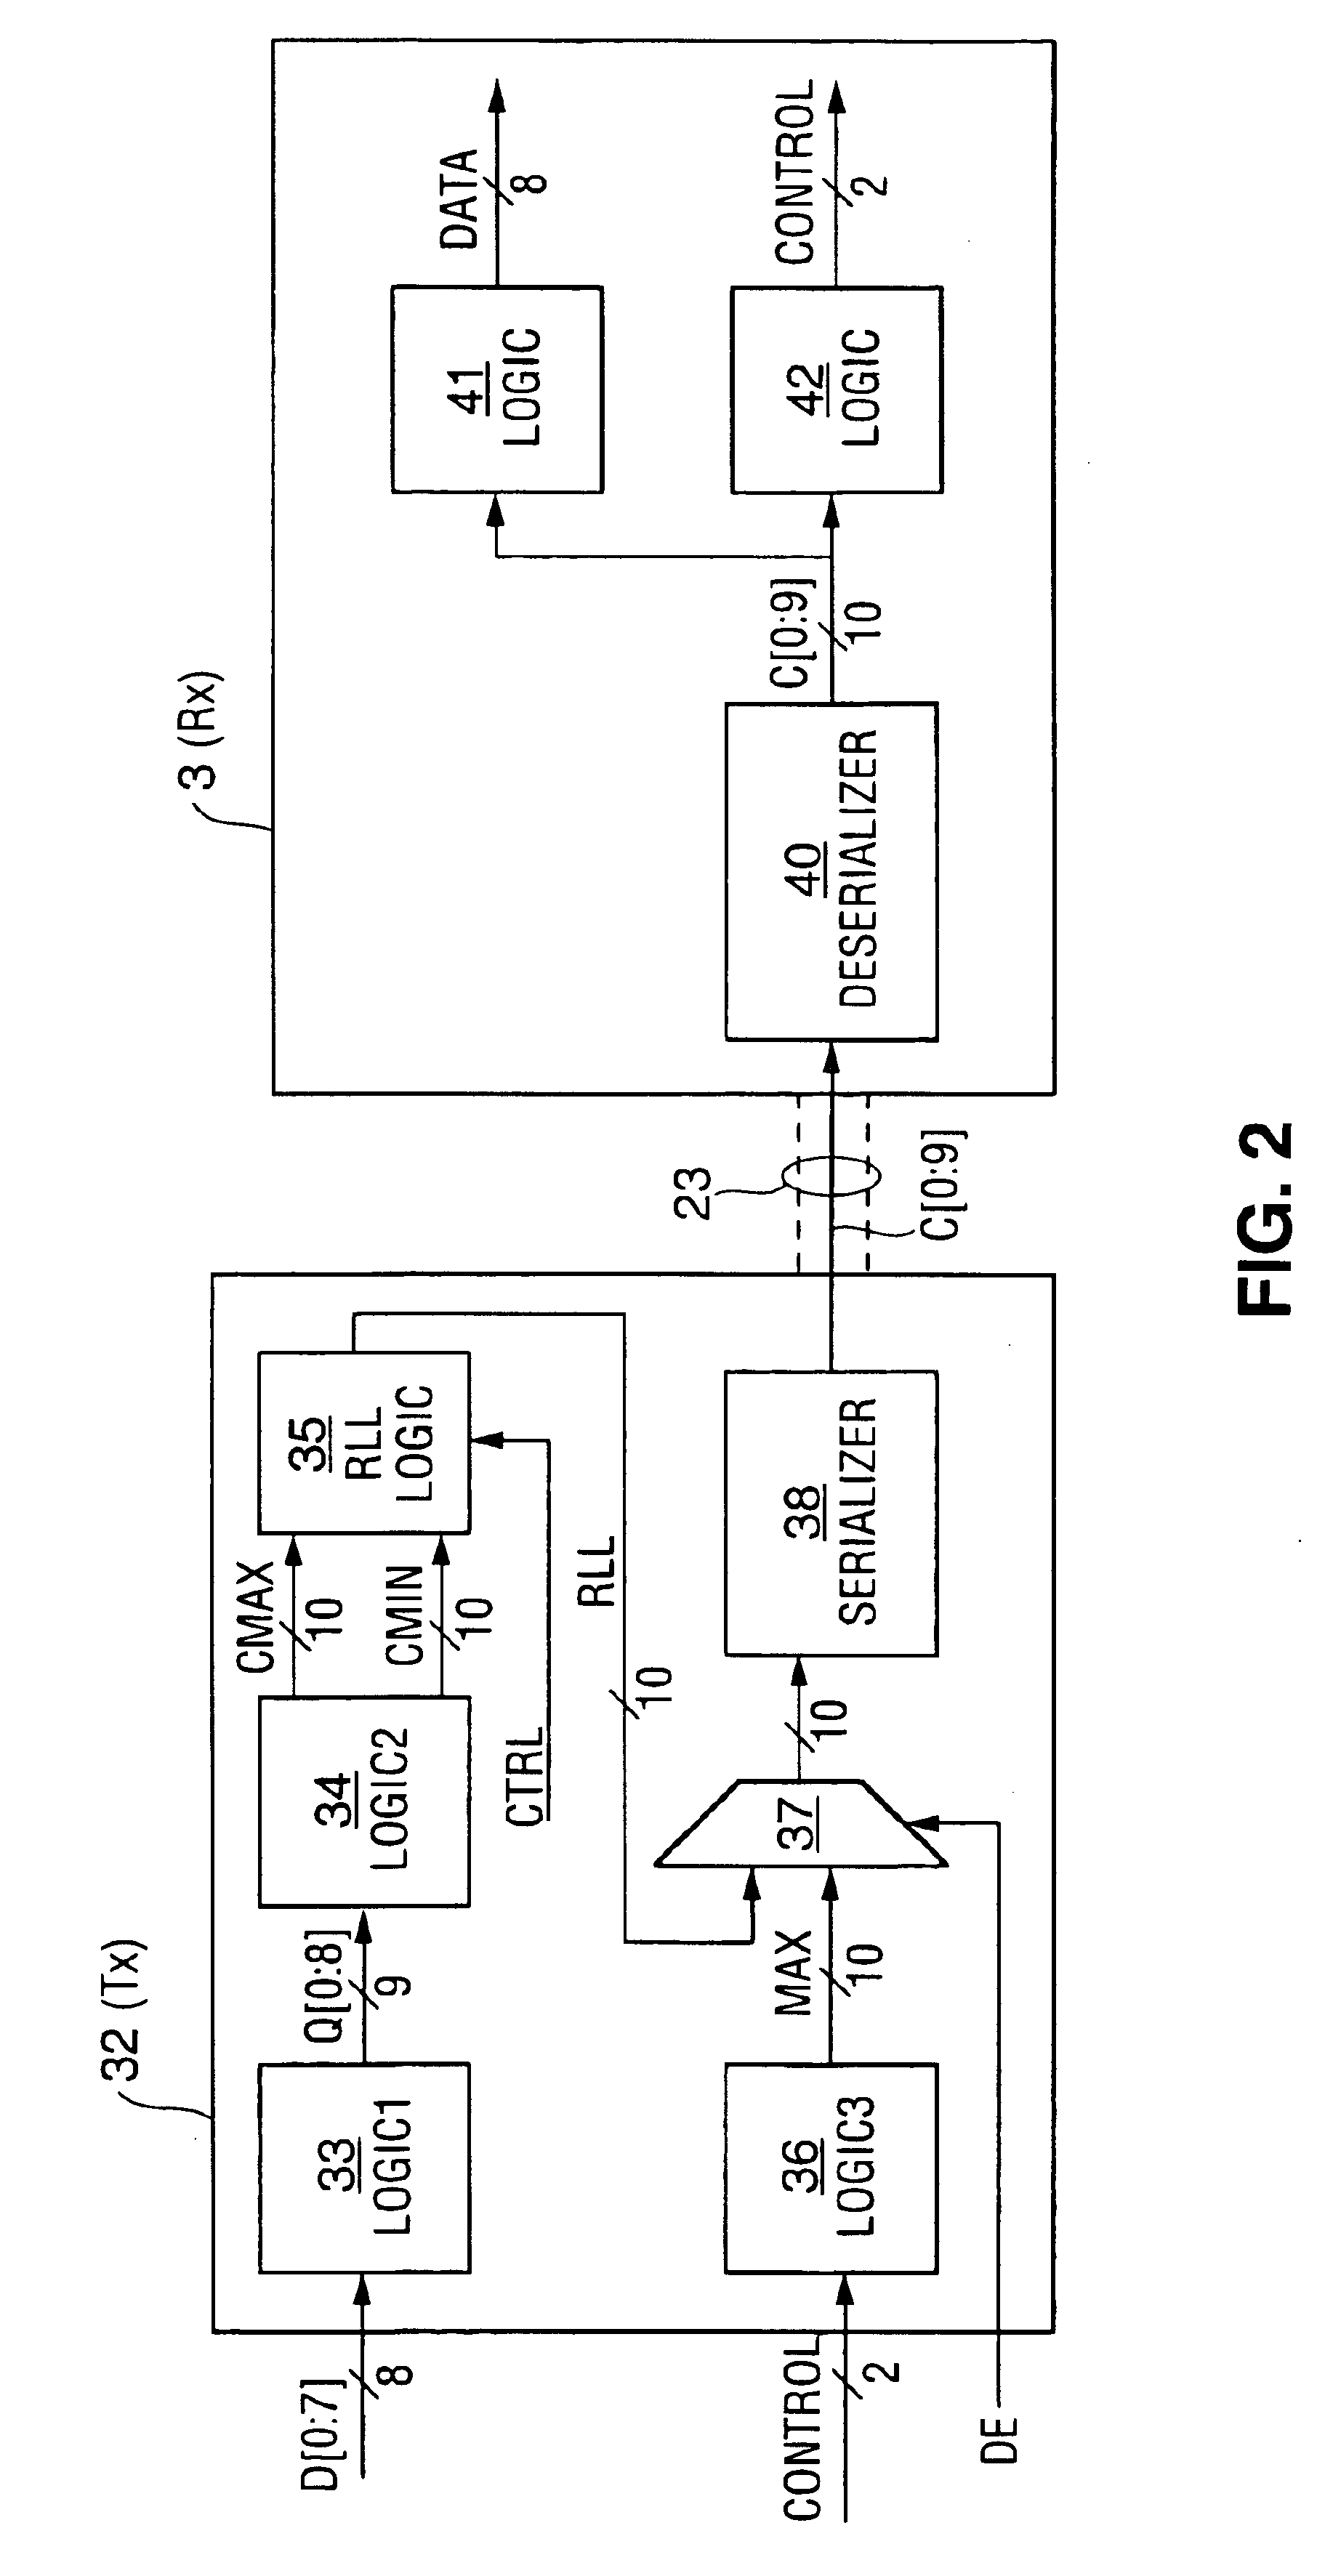 Method and apparatus for run length limited TMDS-like encoding of data